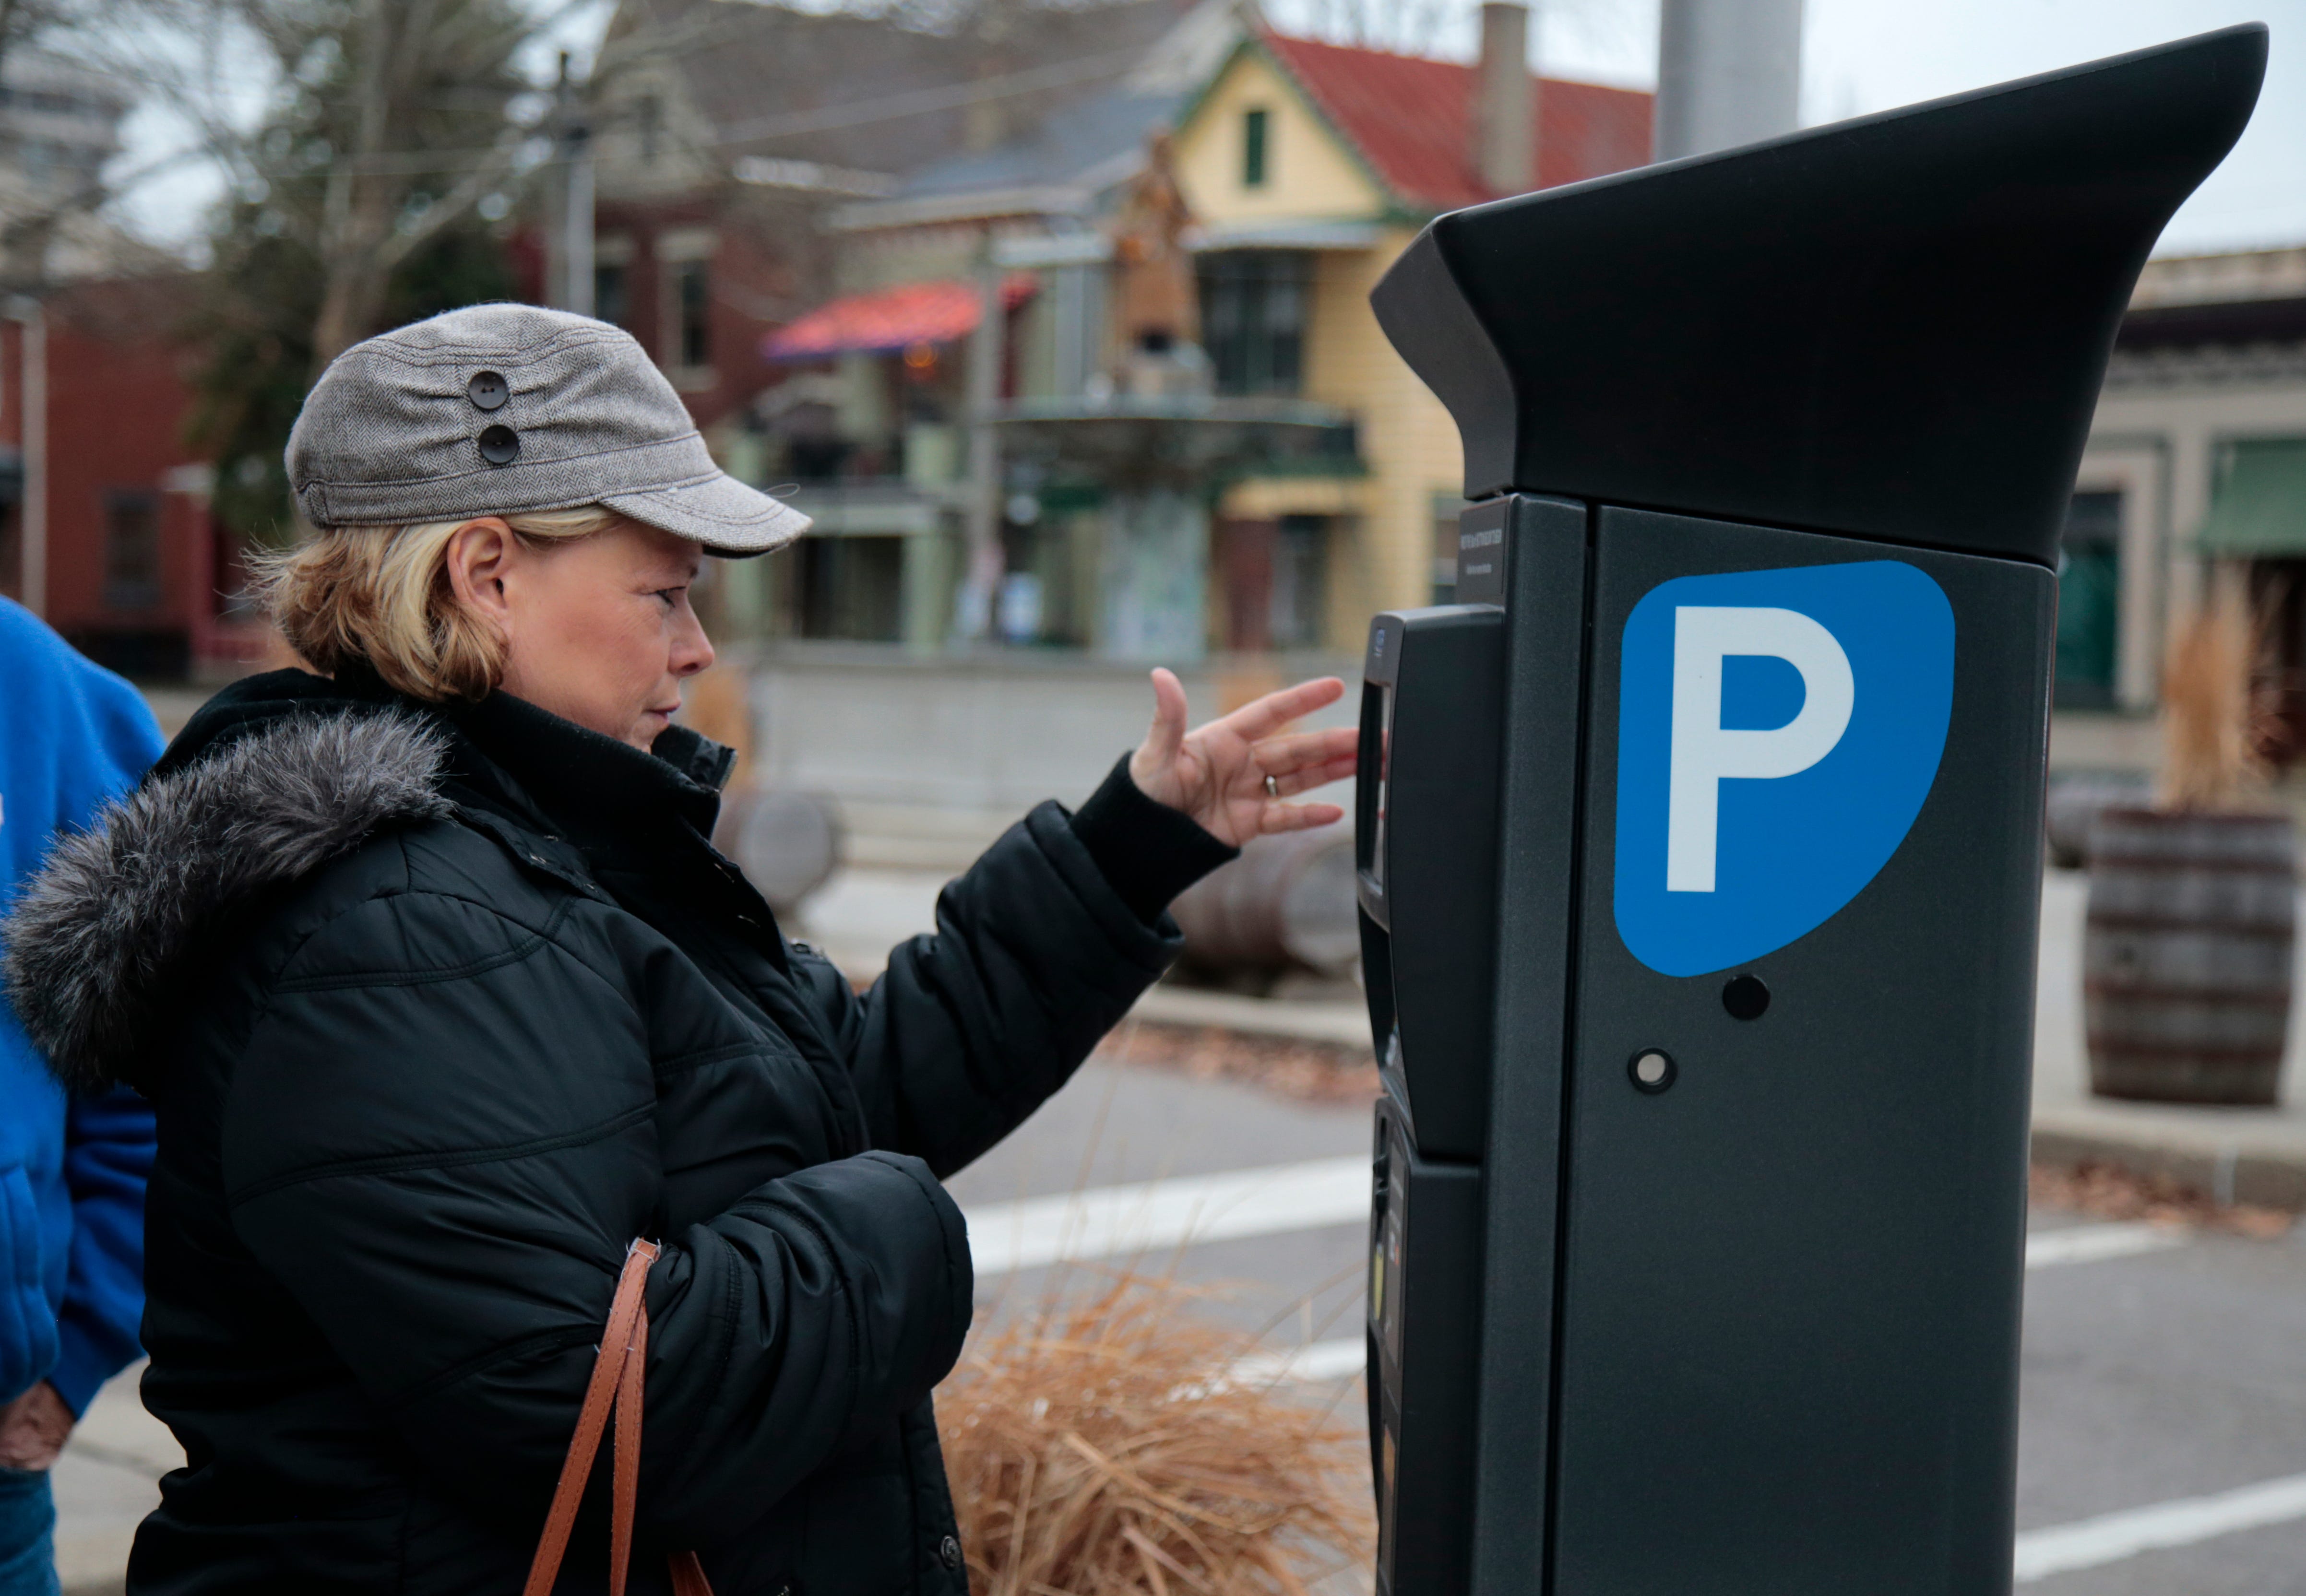 MainStrasse parking free once again